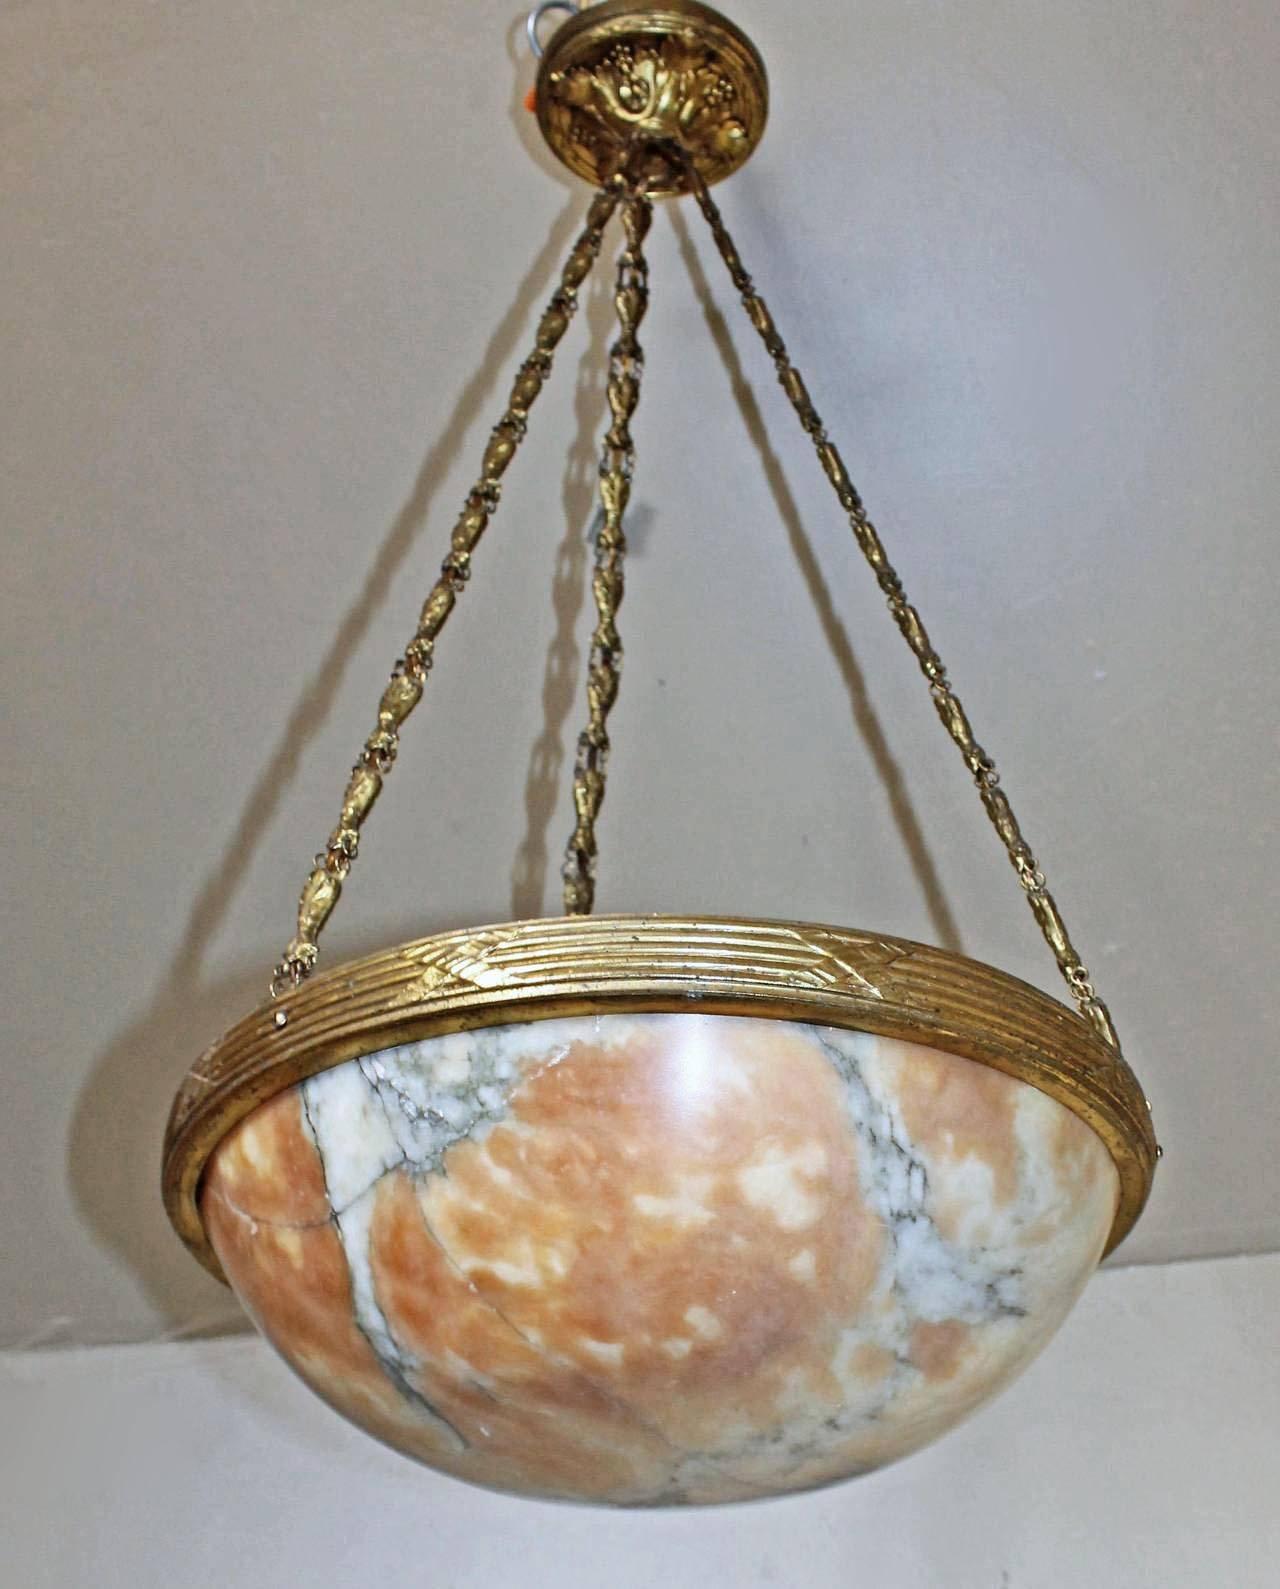 French alabaster chandelier or pendant with brass patinated fittings in the Louis XVl style with rich amber coloring and detailed veining. Fixture is newly wired for the US and uses 3 - 40 watt candelabra base bulbs.

14